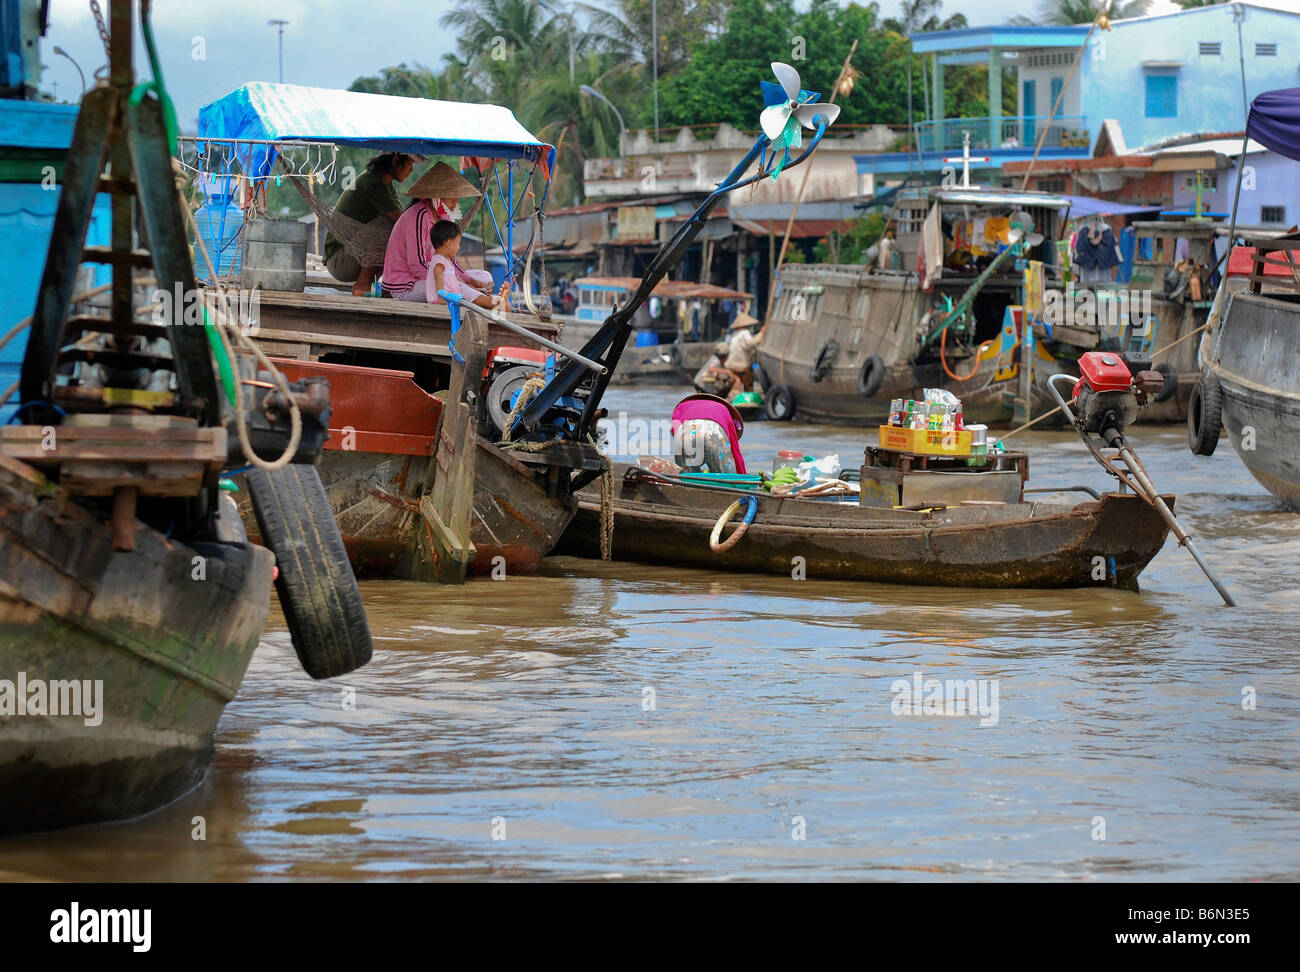 Market traders and customers, Cai Be floating market, Mekong Delta Vinh Long province, Vietnam Stock Photo